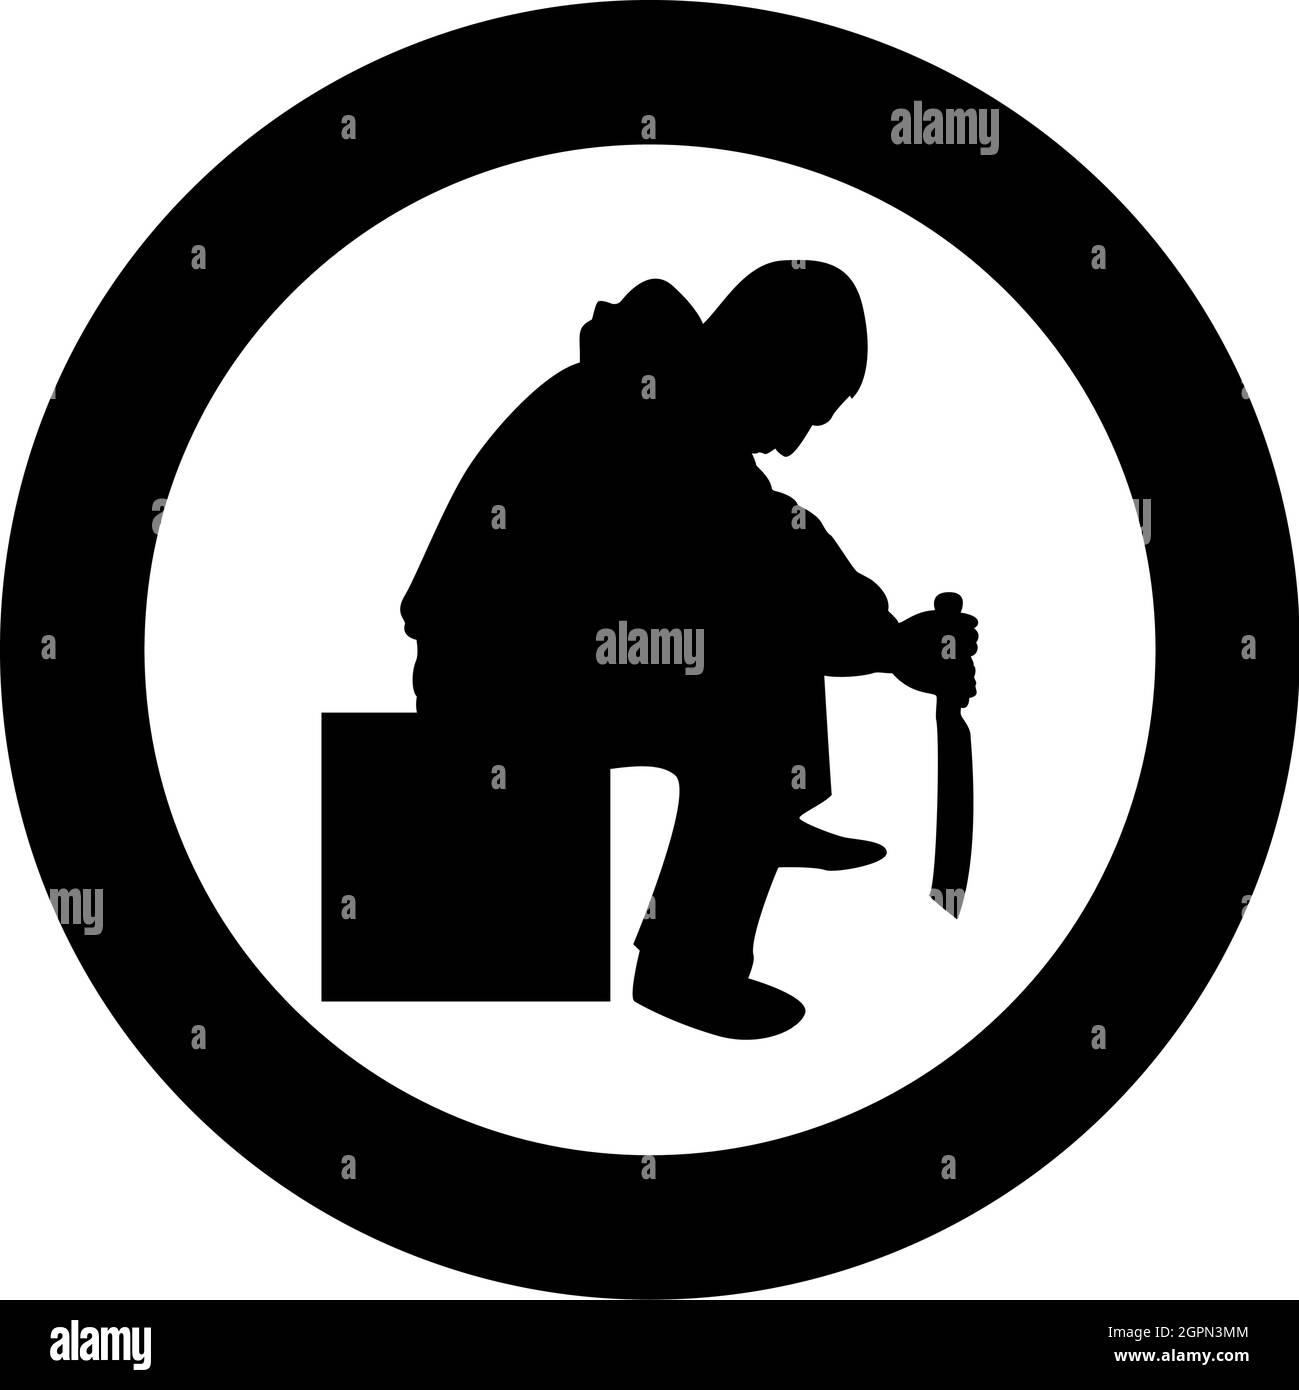 Man with sword machete Cold weapons in hand military man Soldier Serviceman in positions Hunter with knife Fight poses Strong defender Warrior concept Weaponry Sit on box silhouette in circle round black color vector illustration solid outline style image Stock Vector